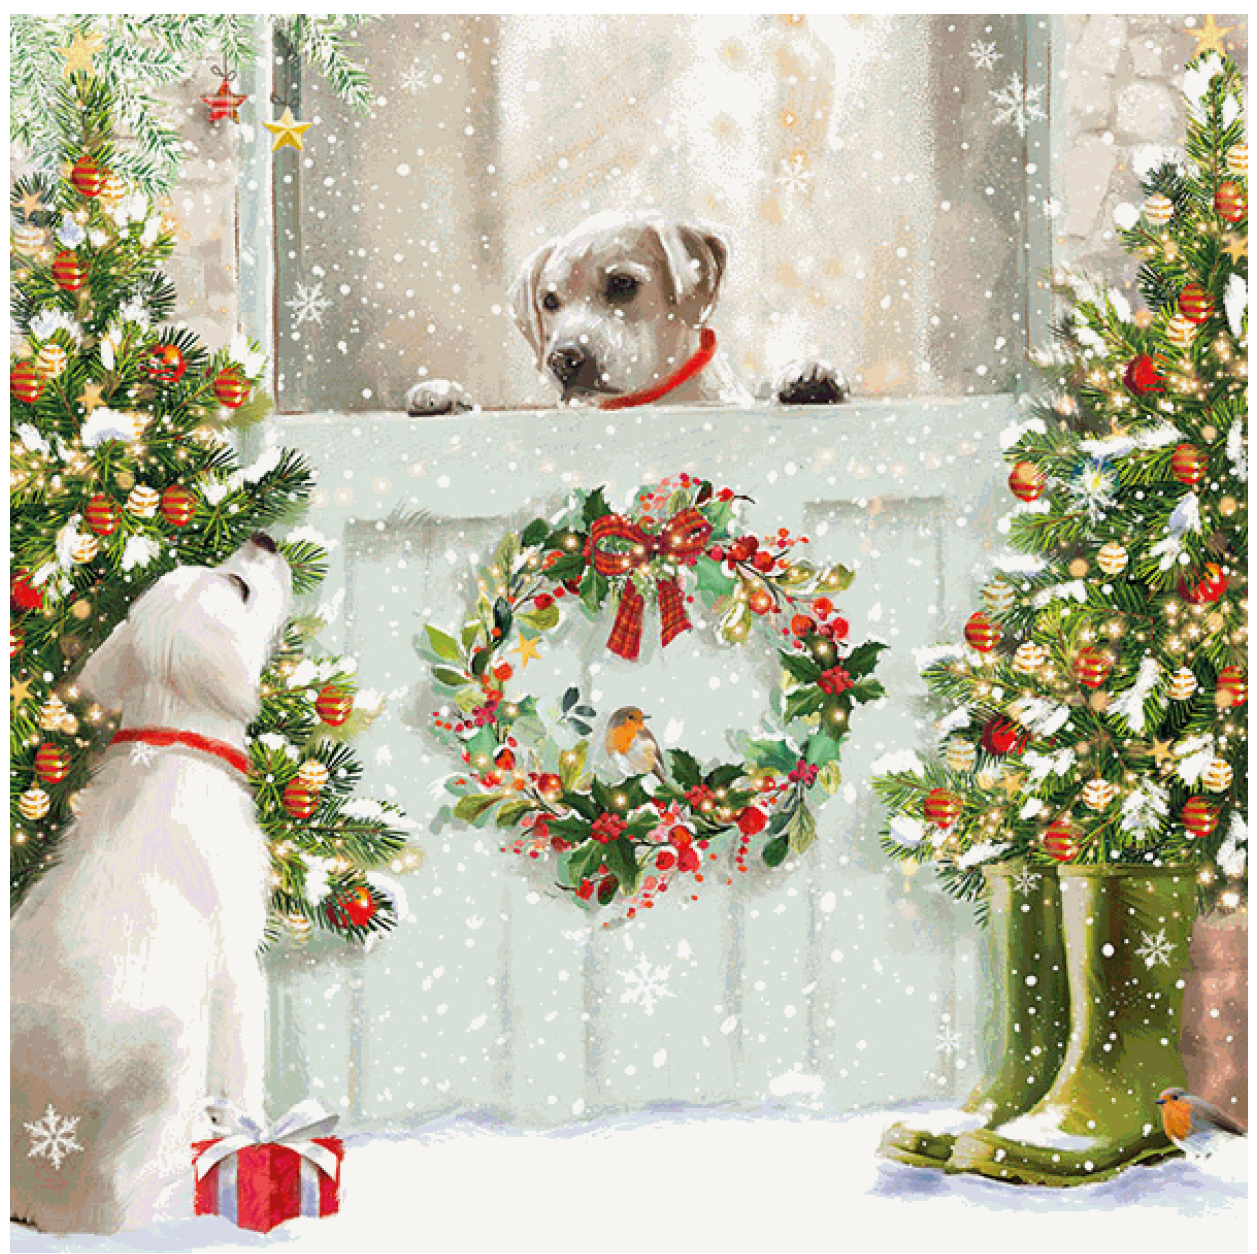 A Welcome Visitor - Christmas Card (10 pack)